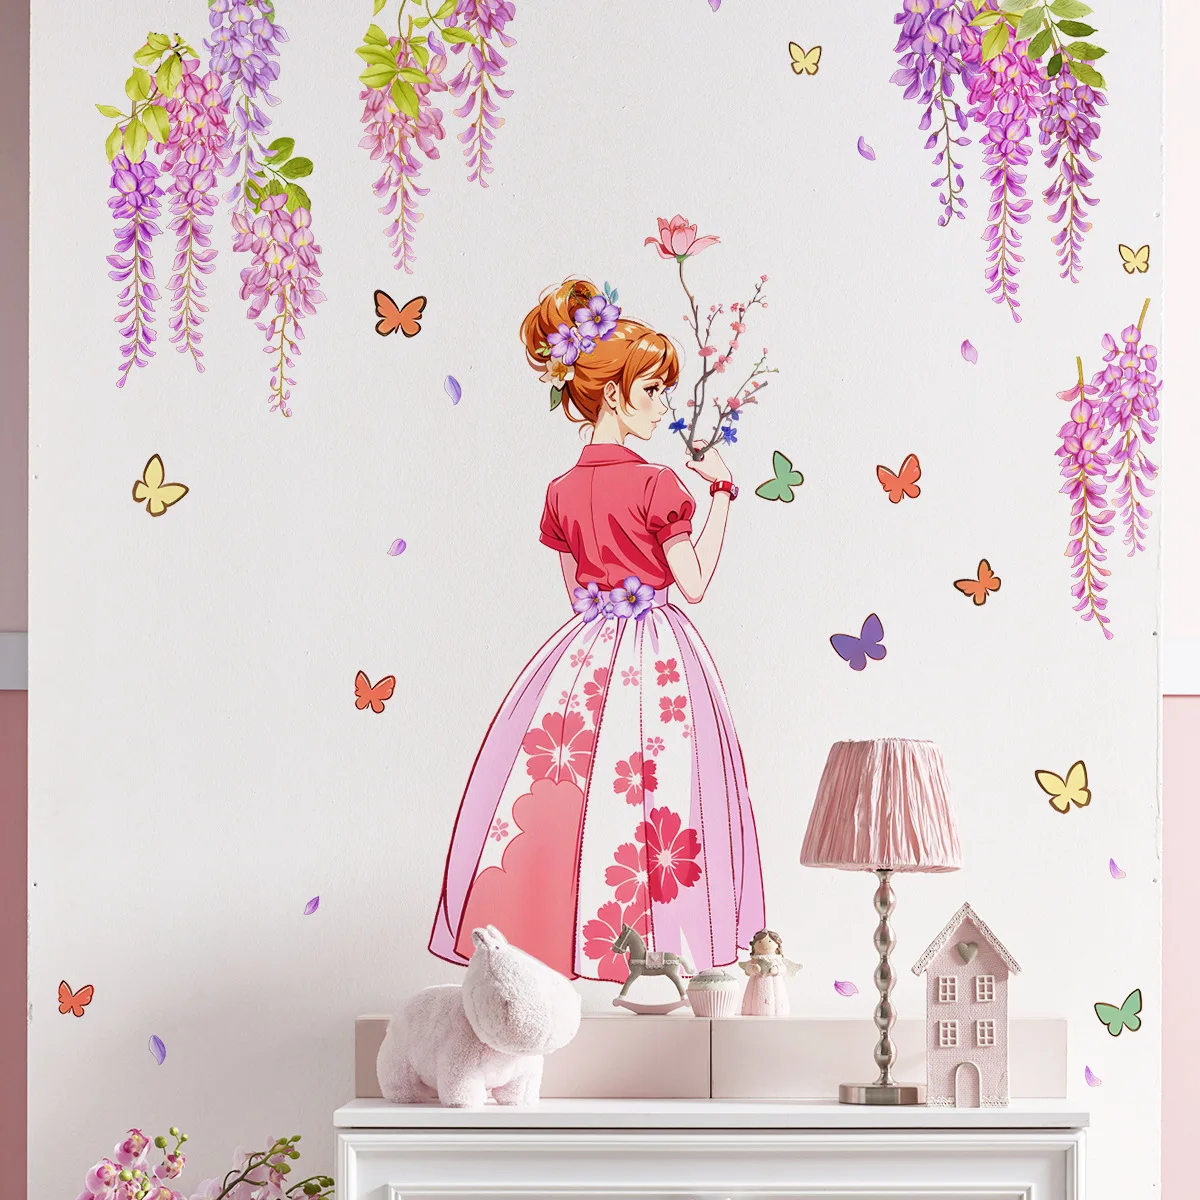 2pcs Plant Vine Girl Butterfly Wall Stickers Living Room Bedroom Background Wall Home Decorative Wall Stickers Wallpaper Ms3032 wellyu papier peint wallpaper for walls 3 d custom wallpaper new york bridge architecture night view tv wall murals behang